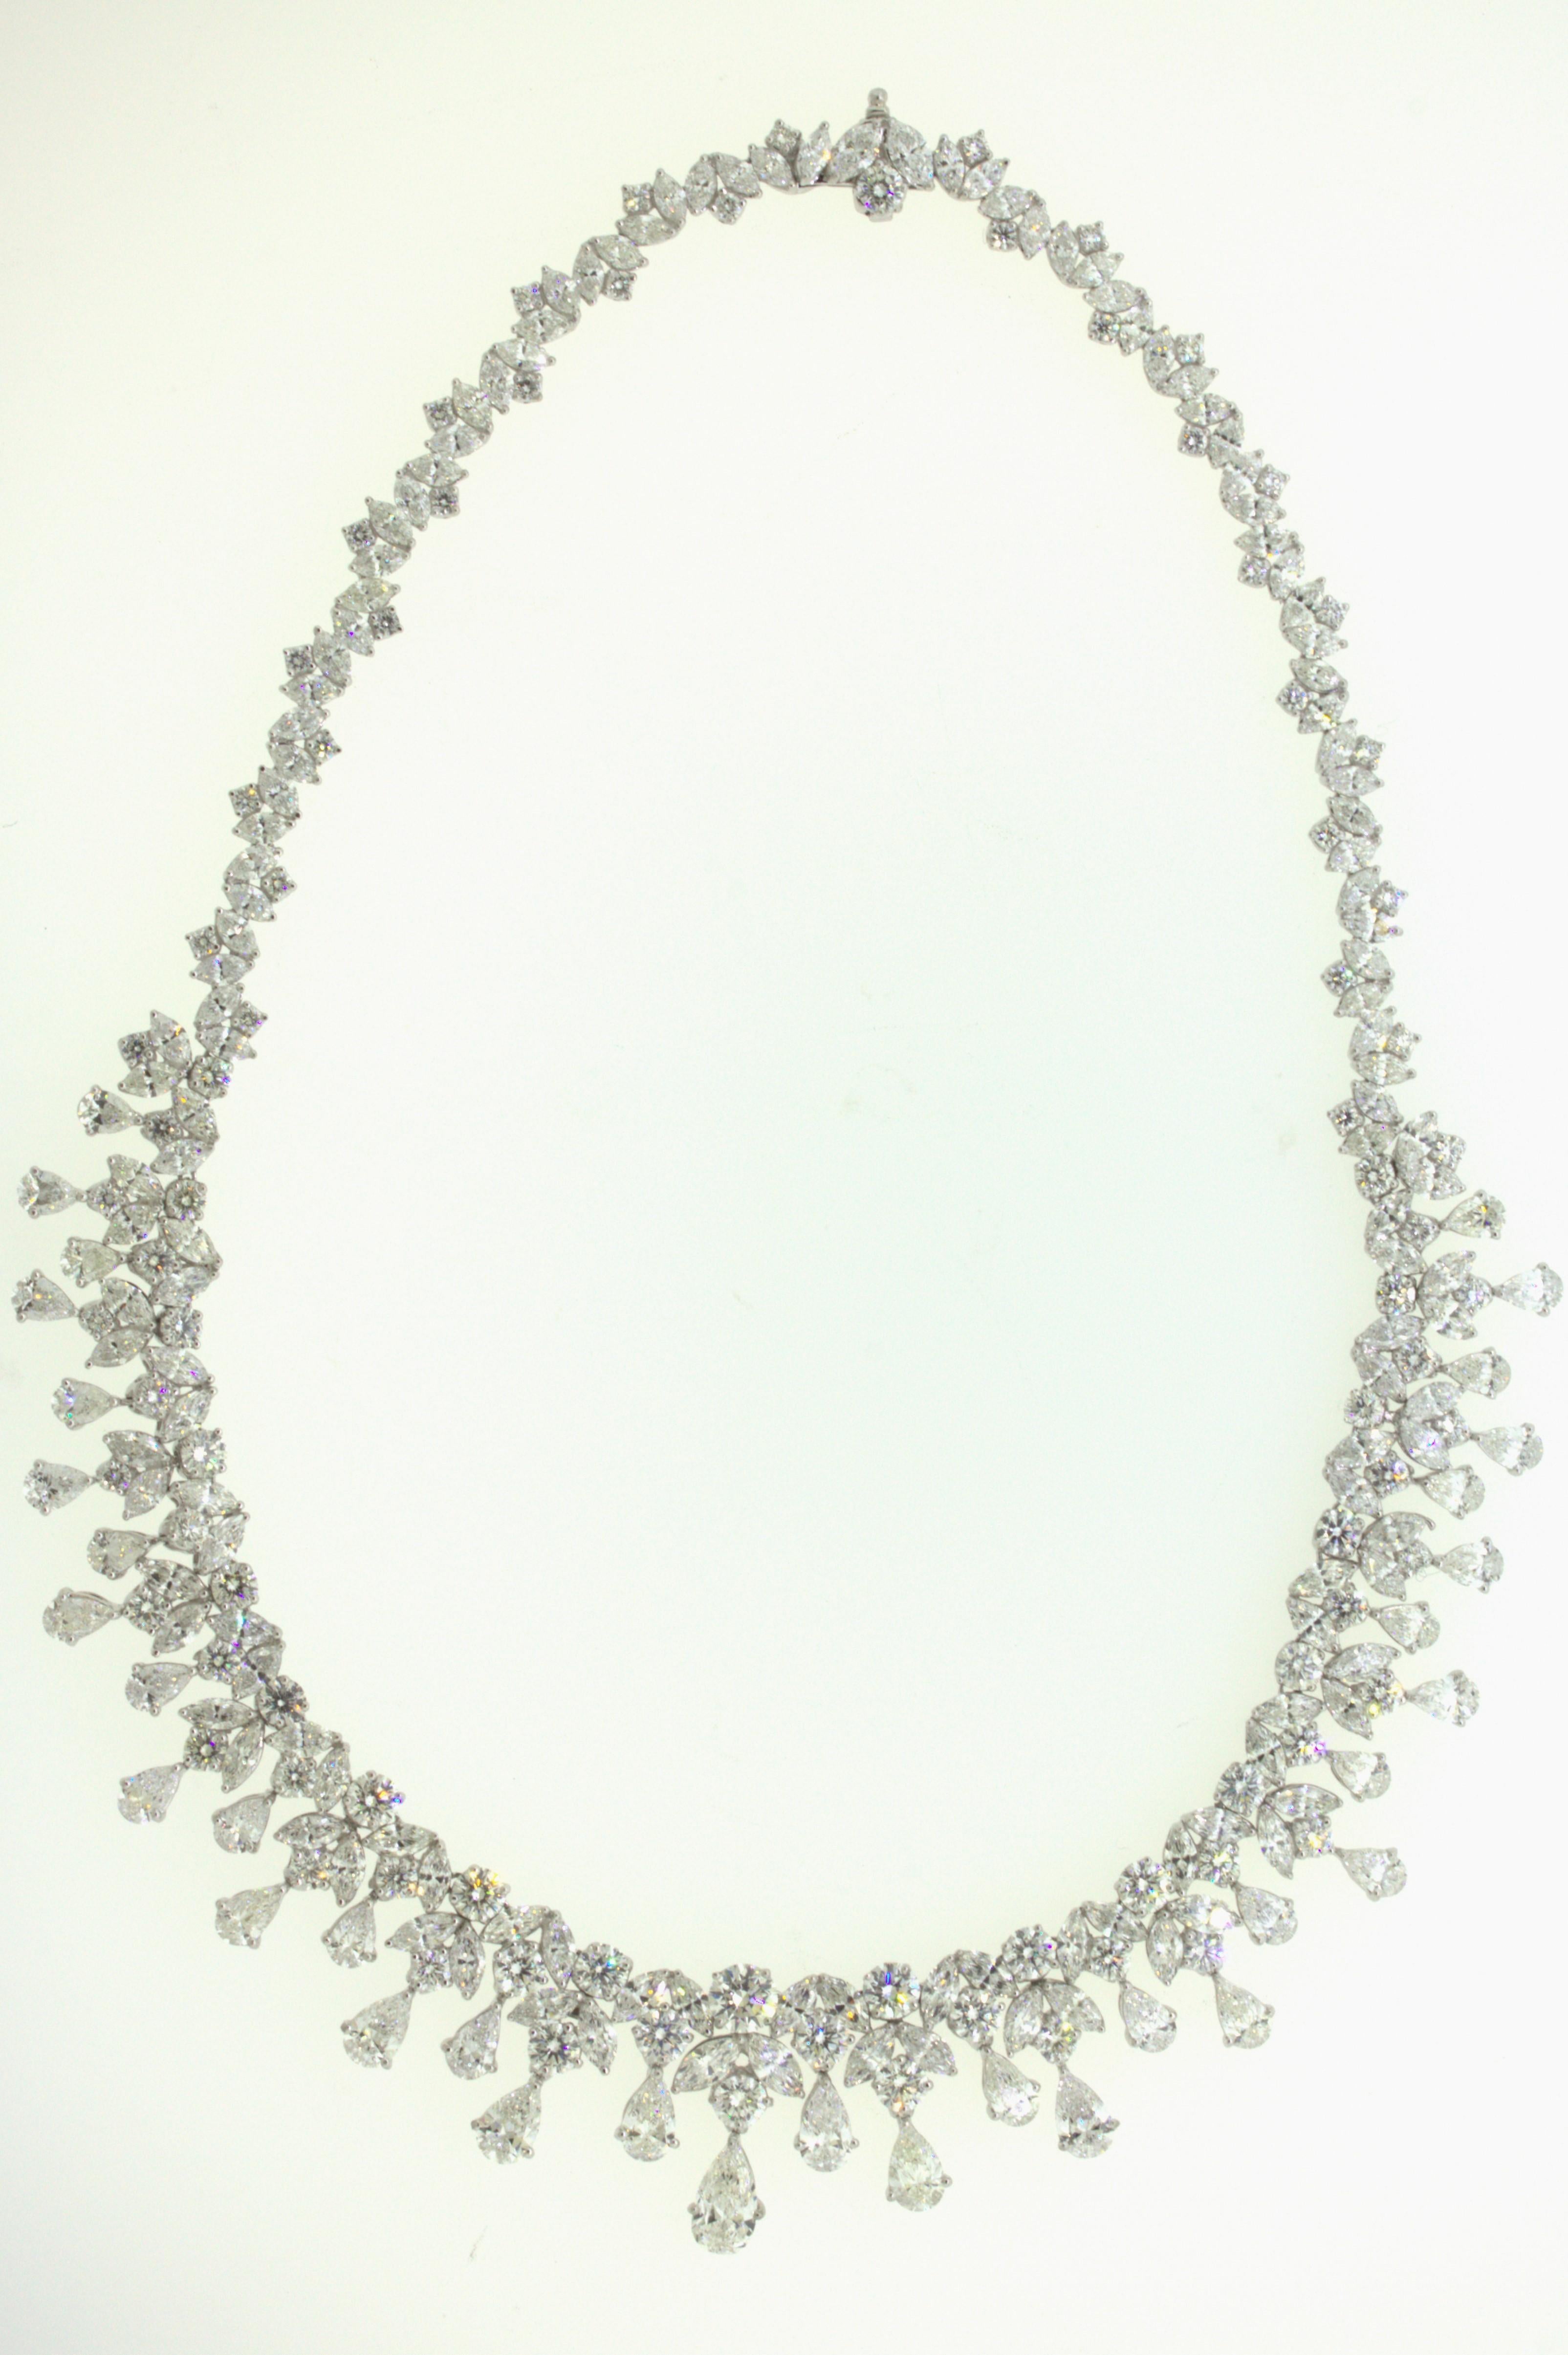 A chic and elegant diamond drop necklace worth of royalty. This large and impressive necklace features 54 carats of large sized round brilliant, marquise, and pear-shape diamonds. The pear-shapes are set as drops and graduate in size with the